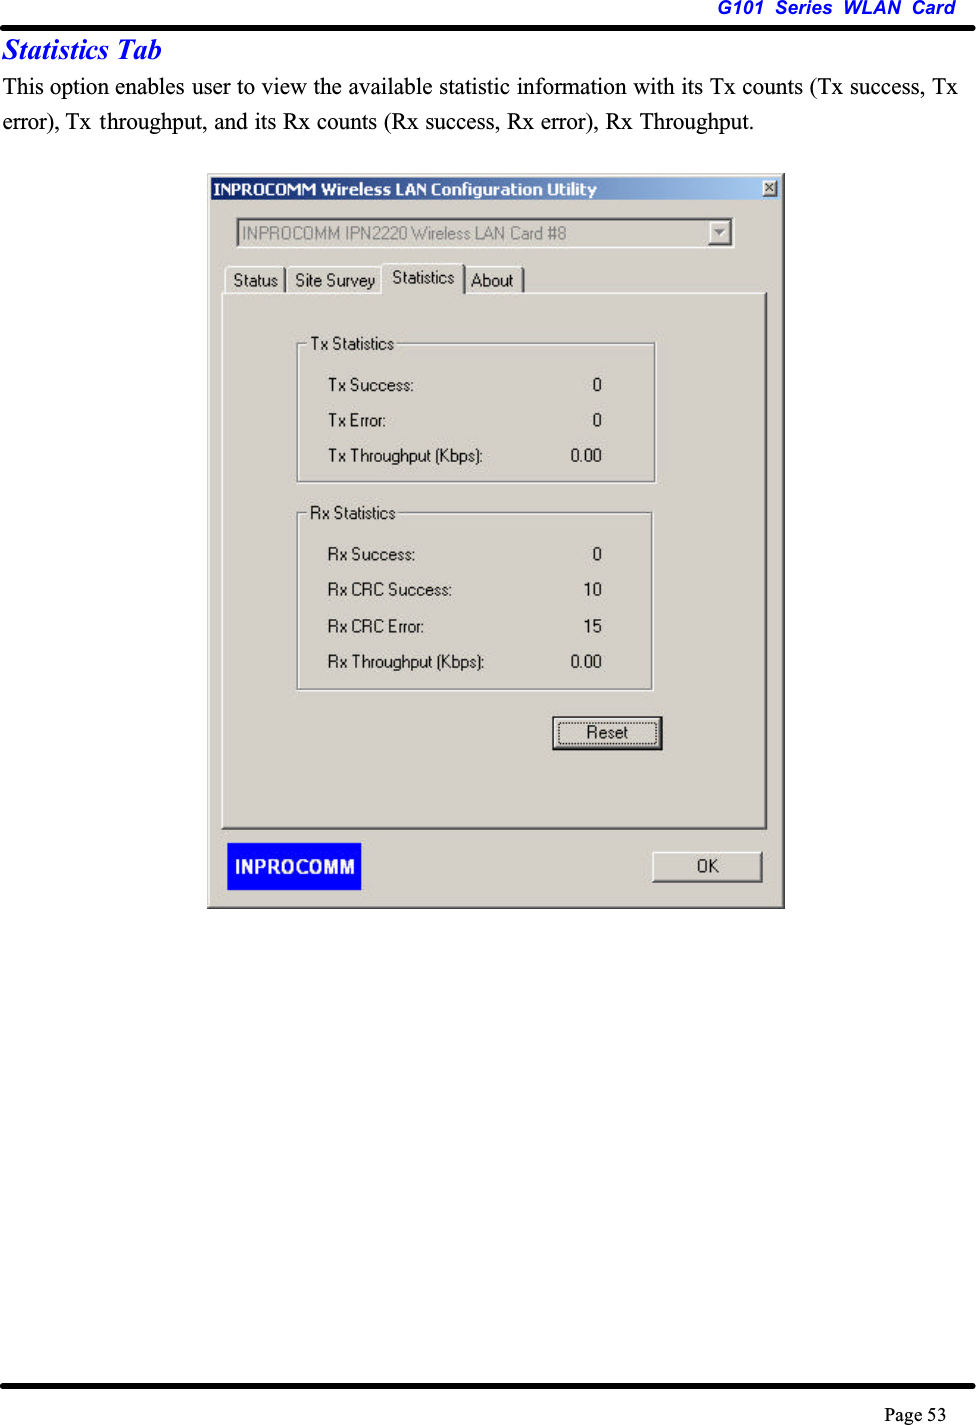 G101 Series WLAN CardPage 53Statistics TabThis option enables user to view the available statistic information with its Tx counts (Tx success, Txerror), Tx  throughput, and its Rx counts (Rx success, Rx error), Rx Throughput. 